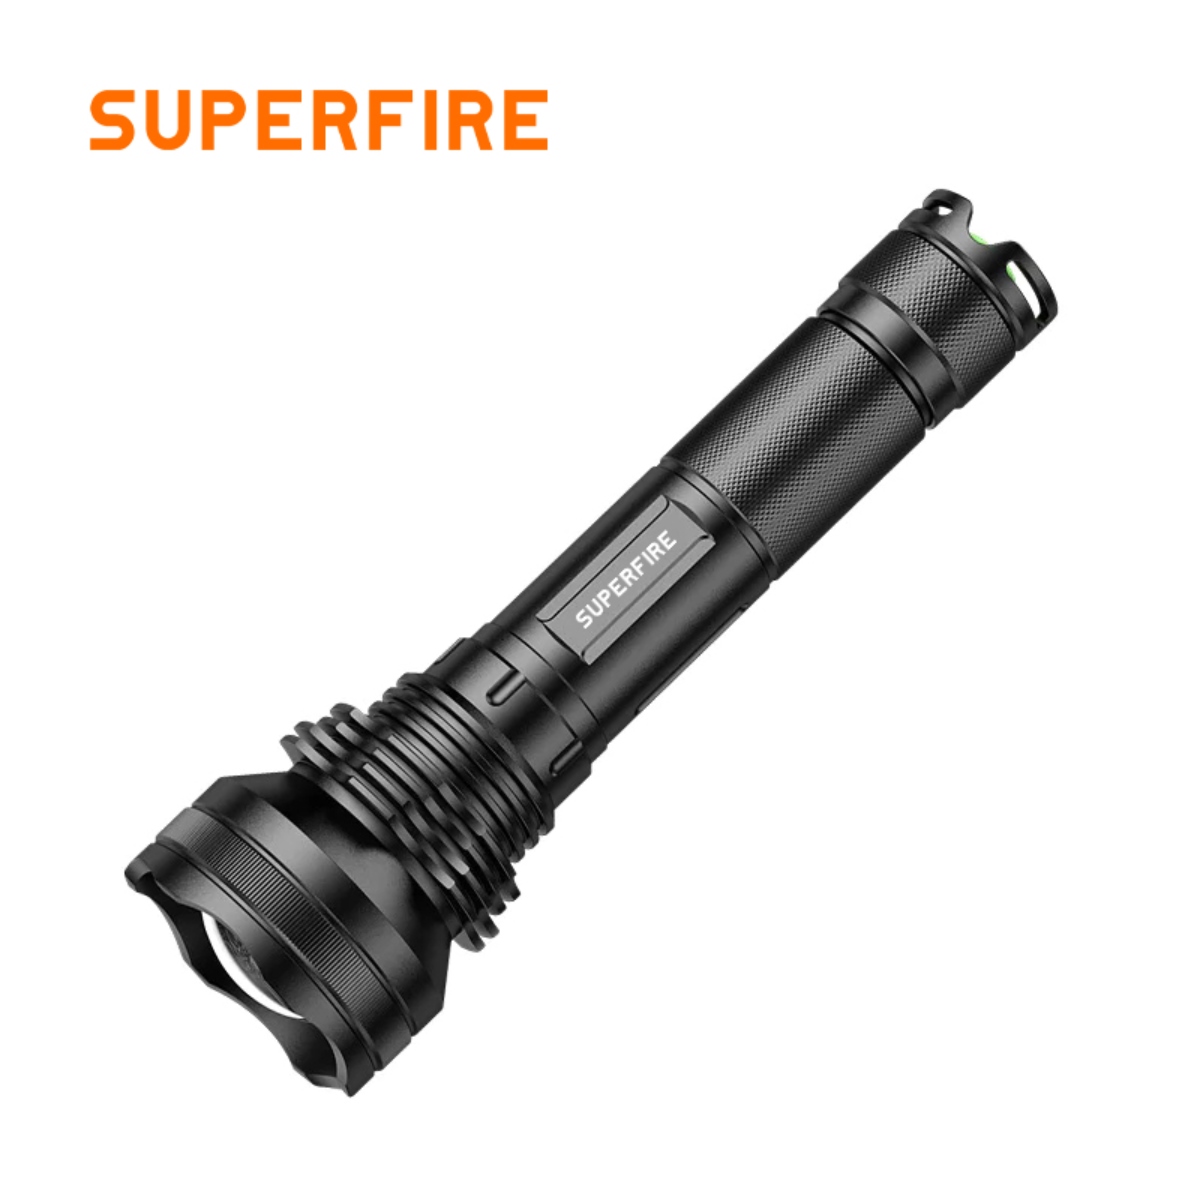 SUPERFIRE L3-P90 zoomable flashlight